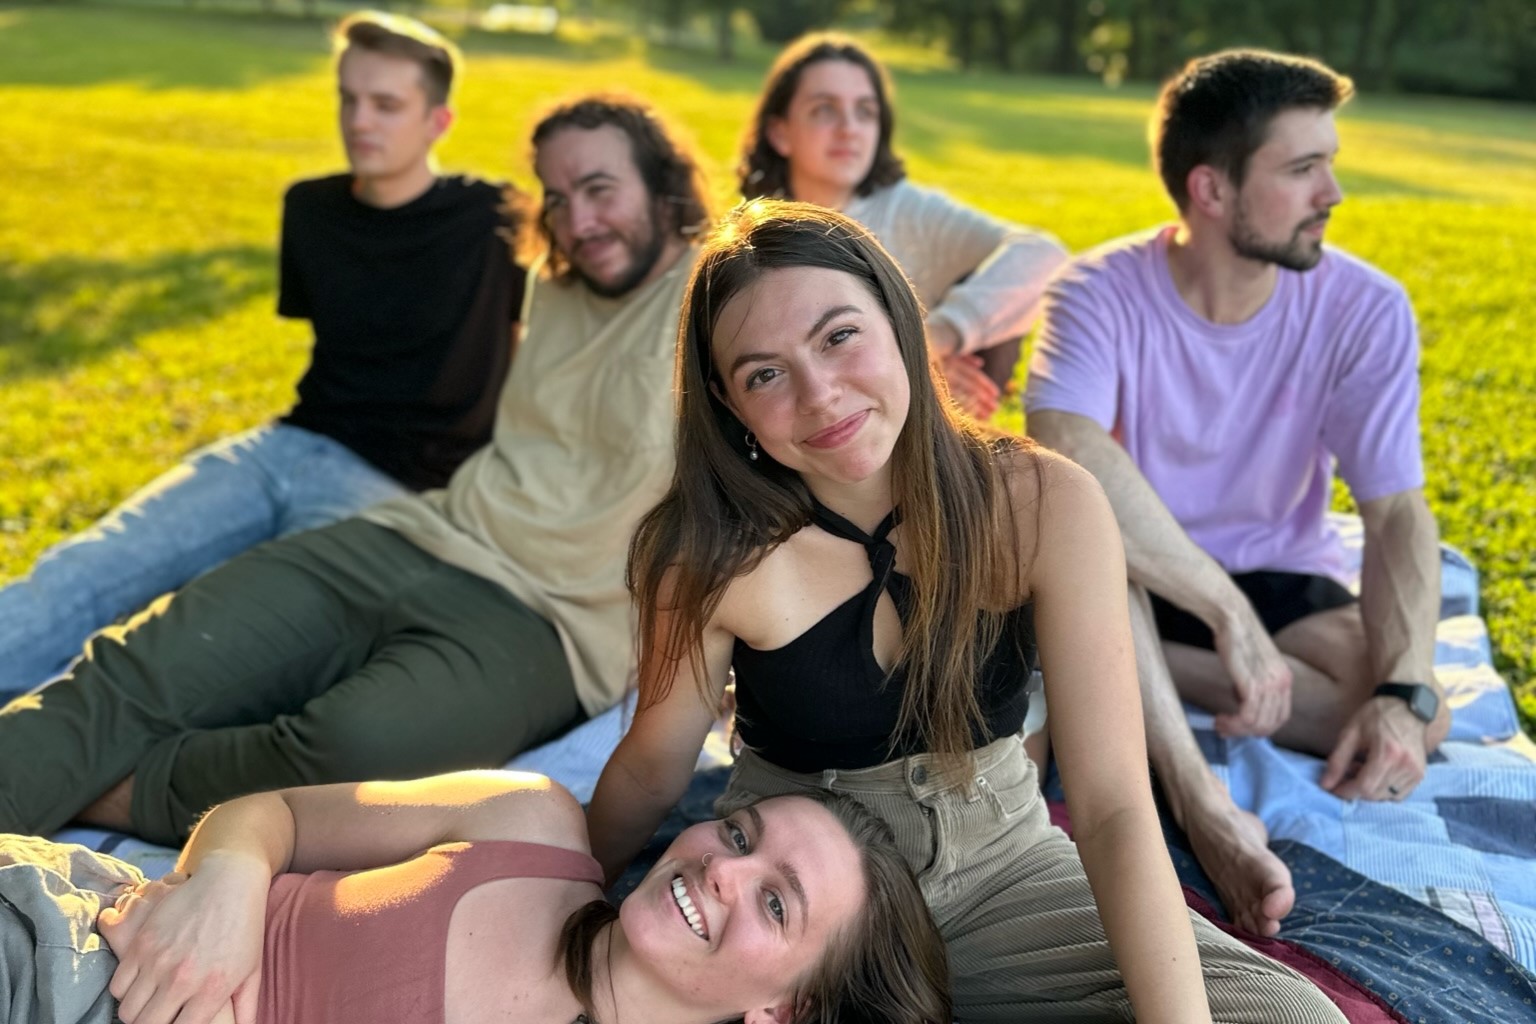 Cherry Park band members sitting on a picnic blanket